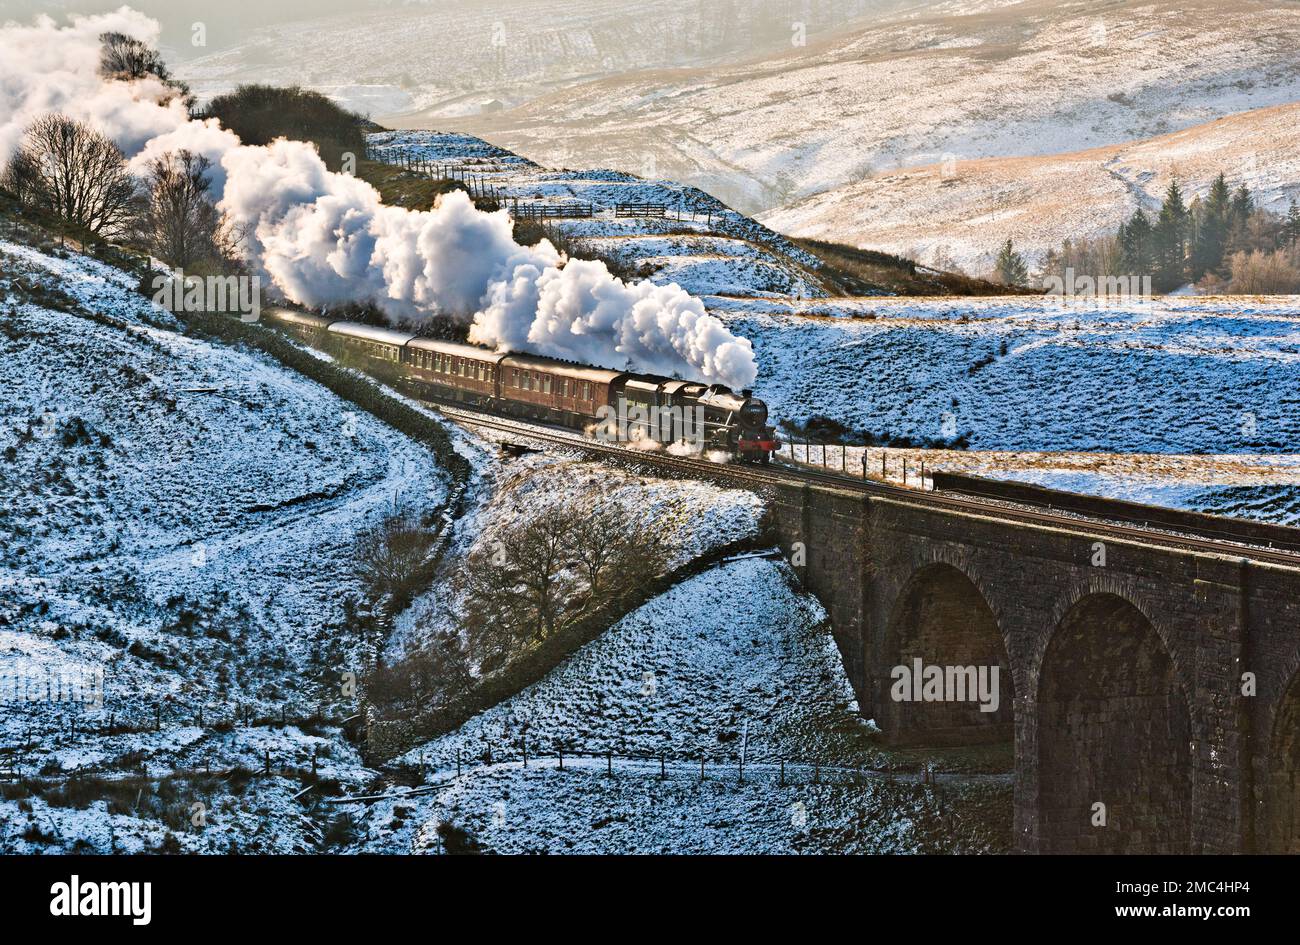 The first steam special of 2023 on the famous Settle-Carlisle railway line. 'The Winter Cumbrian Mountain Express' was hauled by Black Five steam locomotive 44932, from Manchester to Carlisle and back.  The train is seen here at Arten Gill Viaduct, in Dentdale, on the Settle-Carlisle line. Credit: John Bentley/Alamy Live News Stock Photo